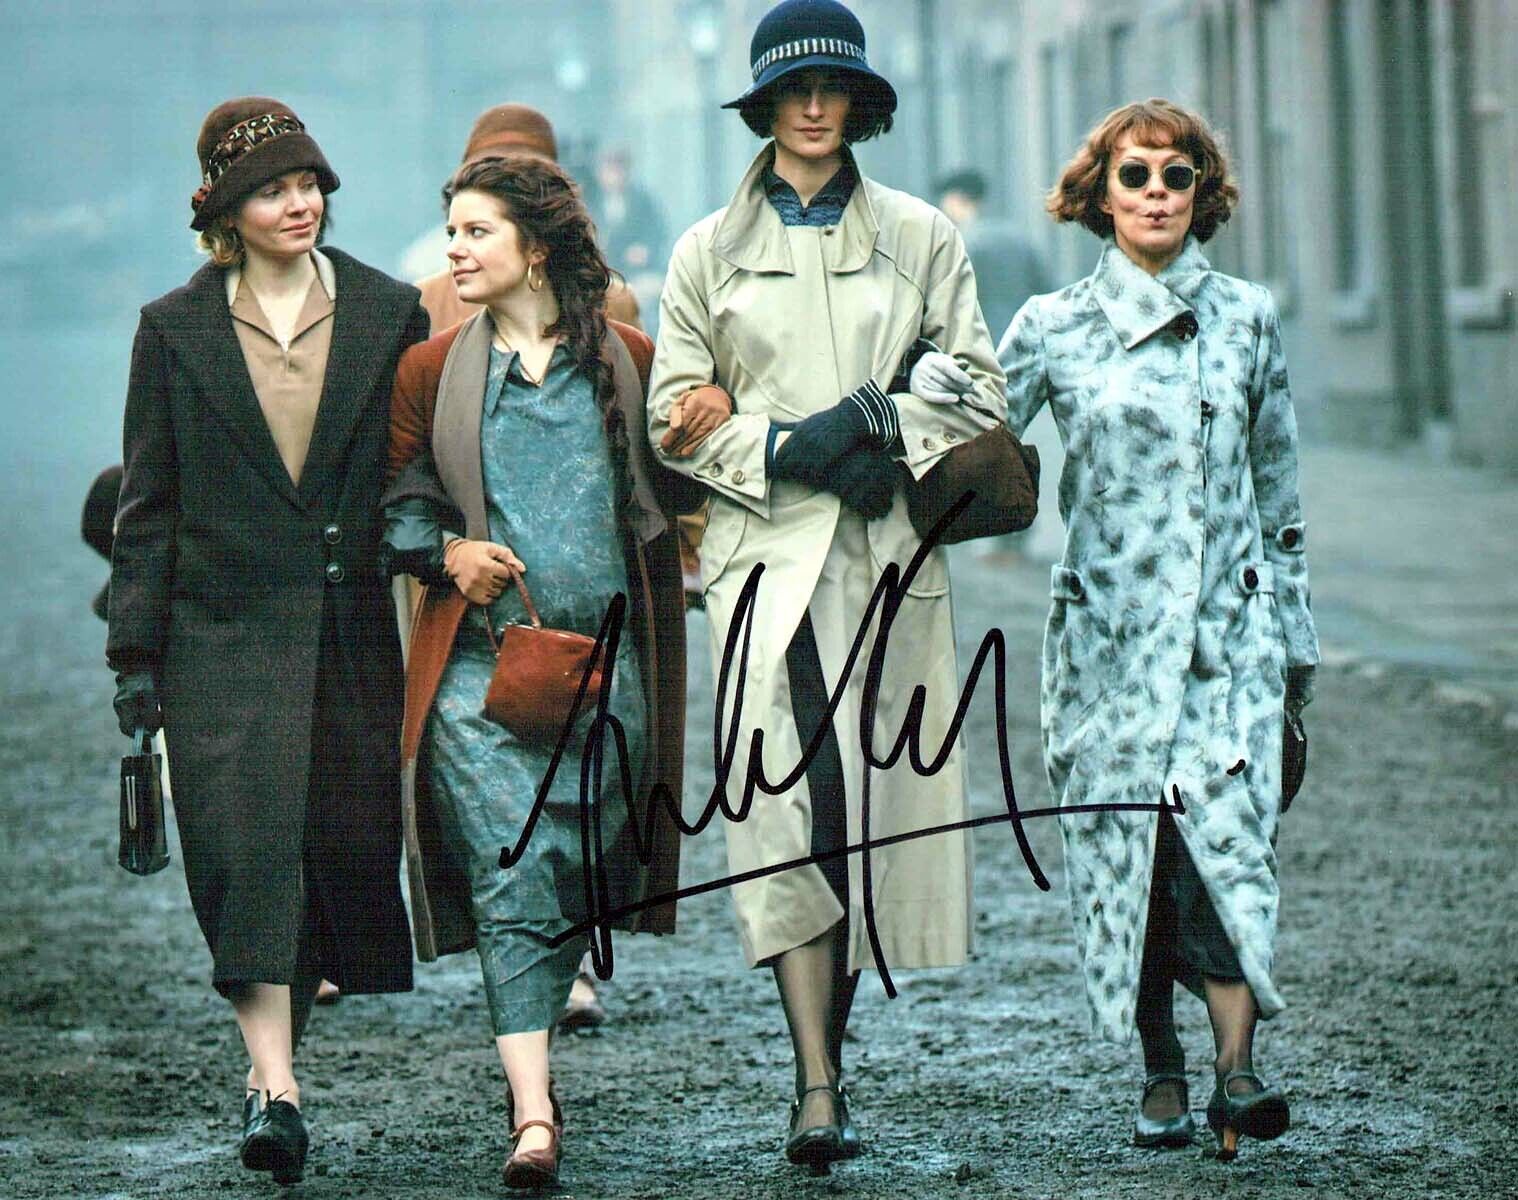 Helen McCRORY SIGNED 10x8 Photo Poster painting 2 AFTAL Autograph COA Peaky Blinders Polly GRAY